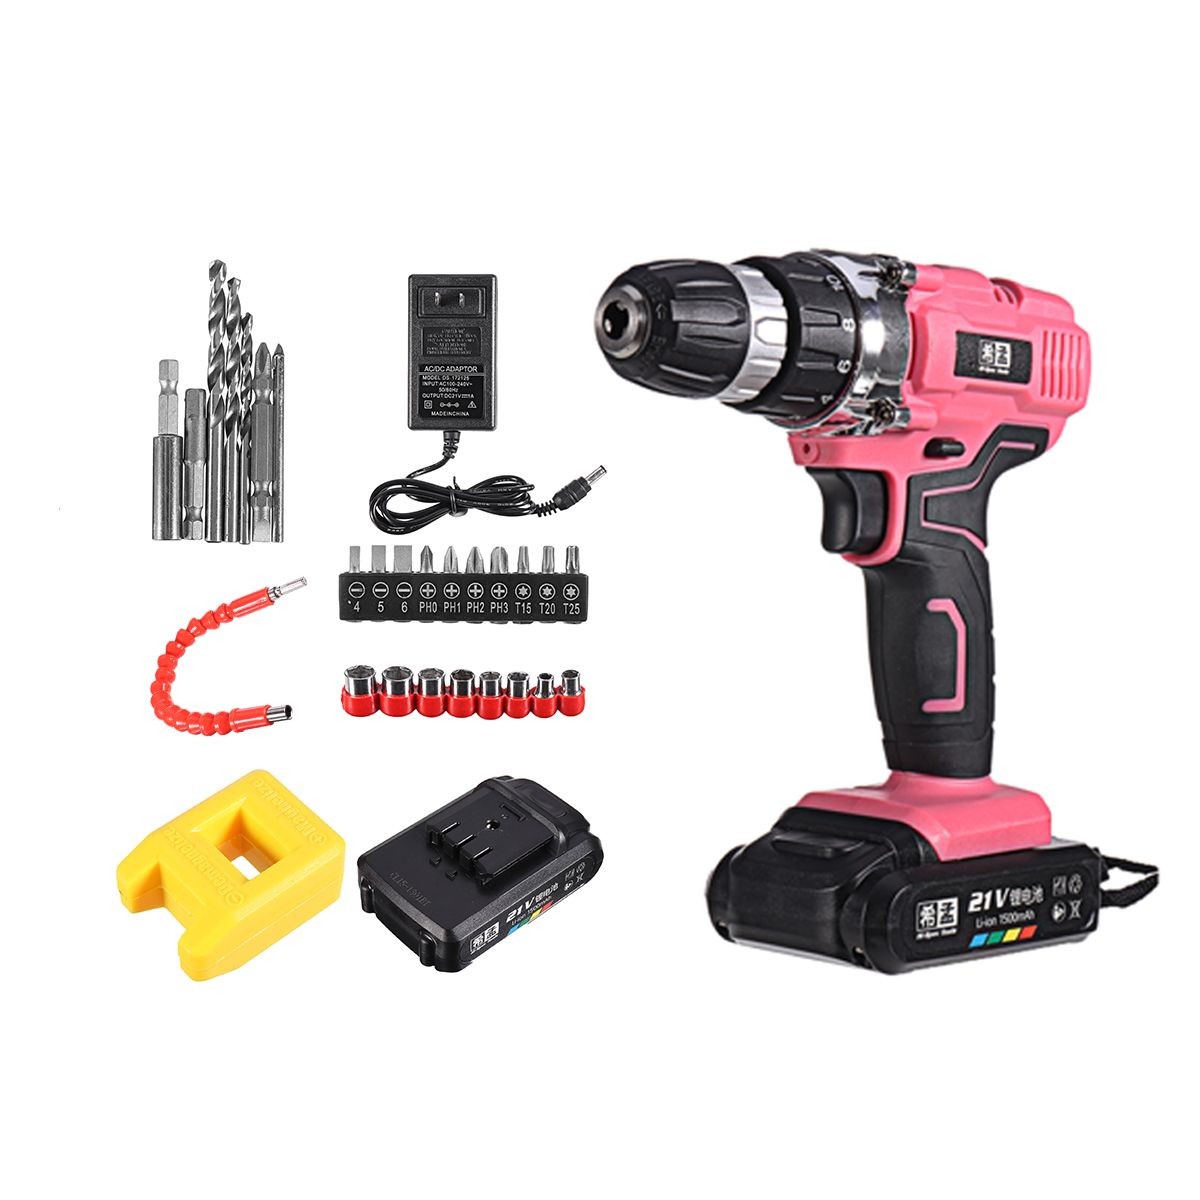 1221V-Brushless-Impact-Wrench-15002000mAH-Cordless-Rechargeable-Electric-Drill-Tool-With-Battery-1748434